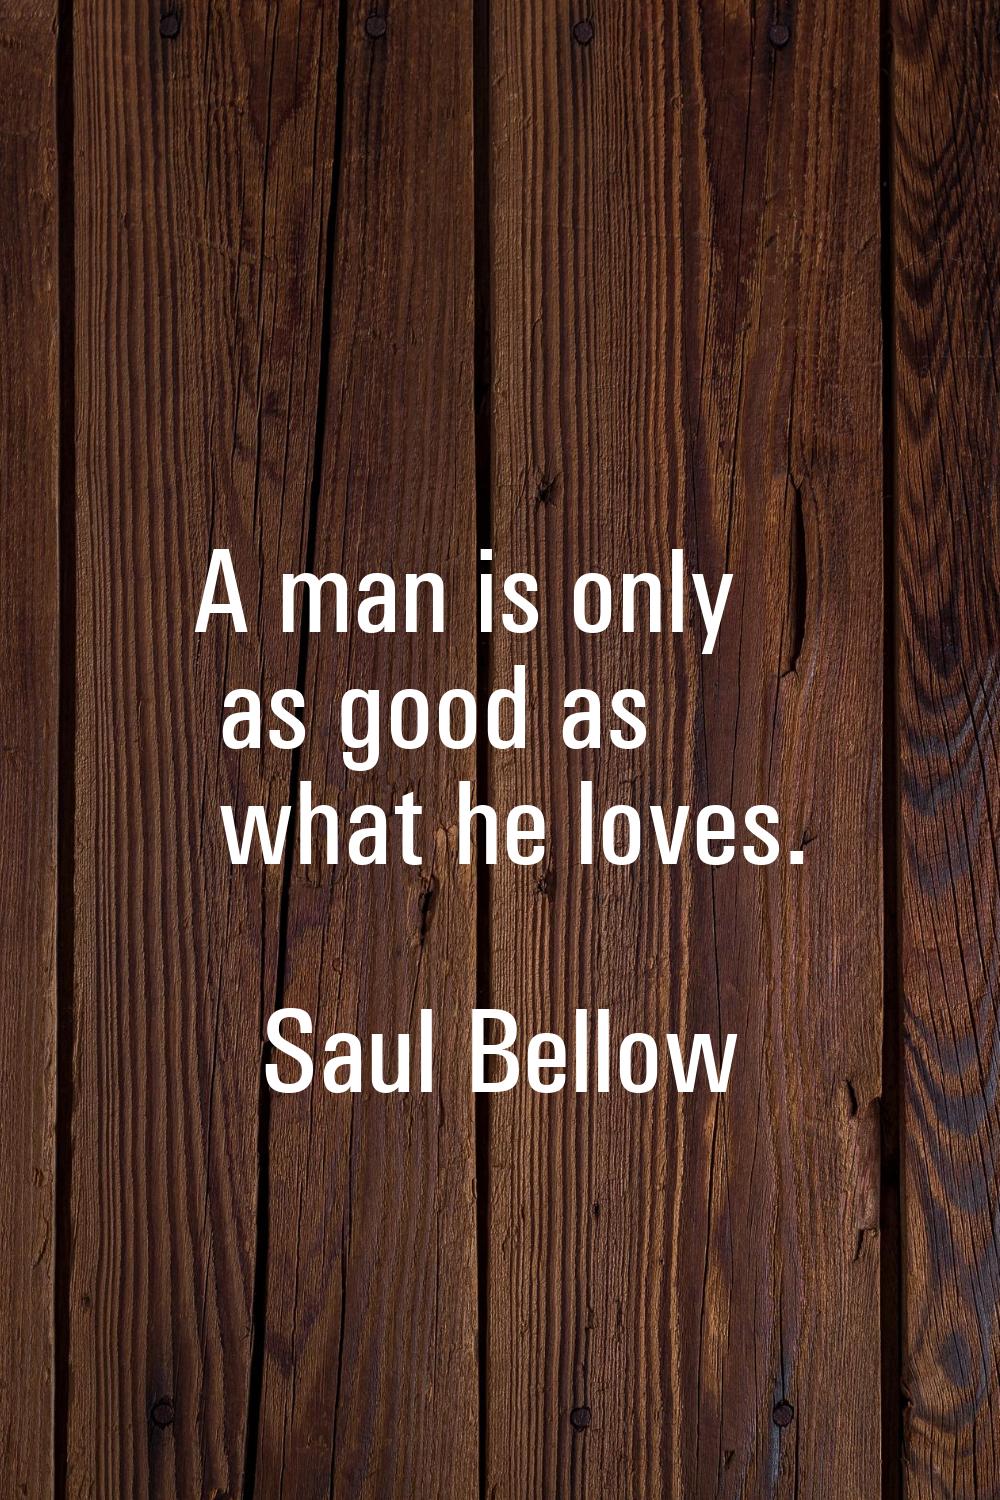 A man is only as good as what he loves.